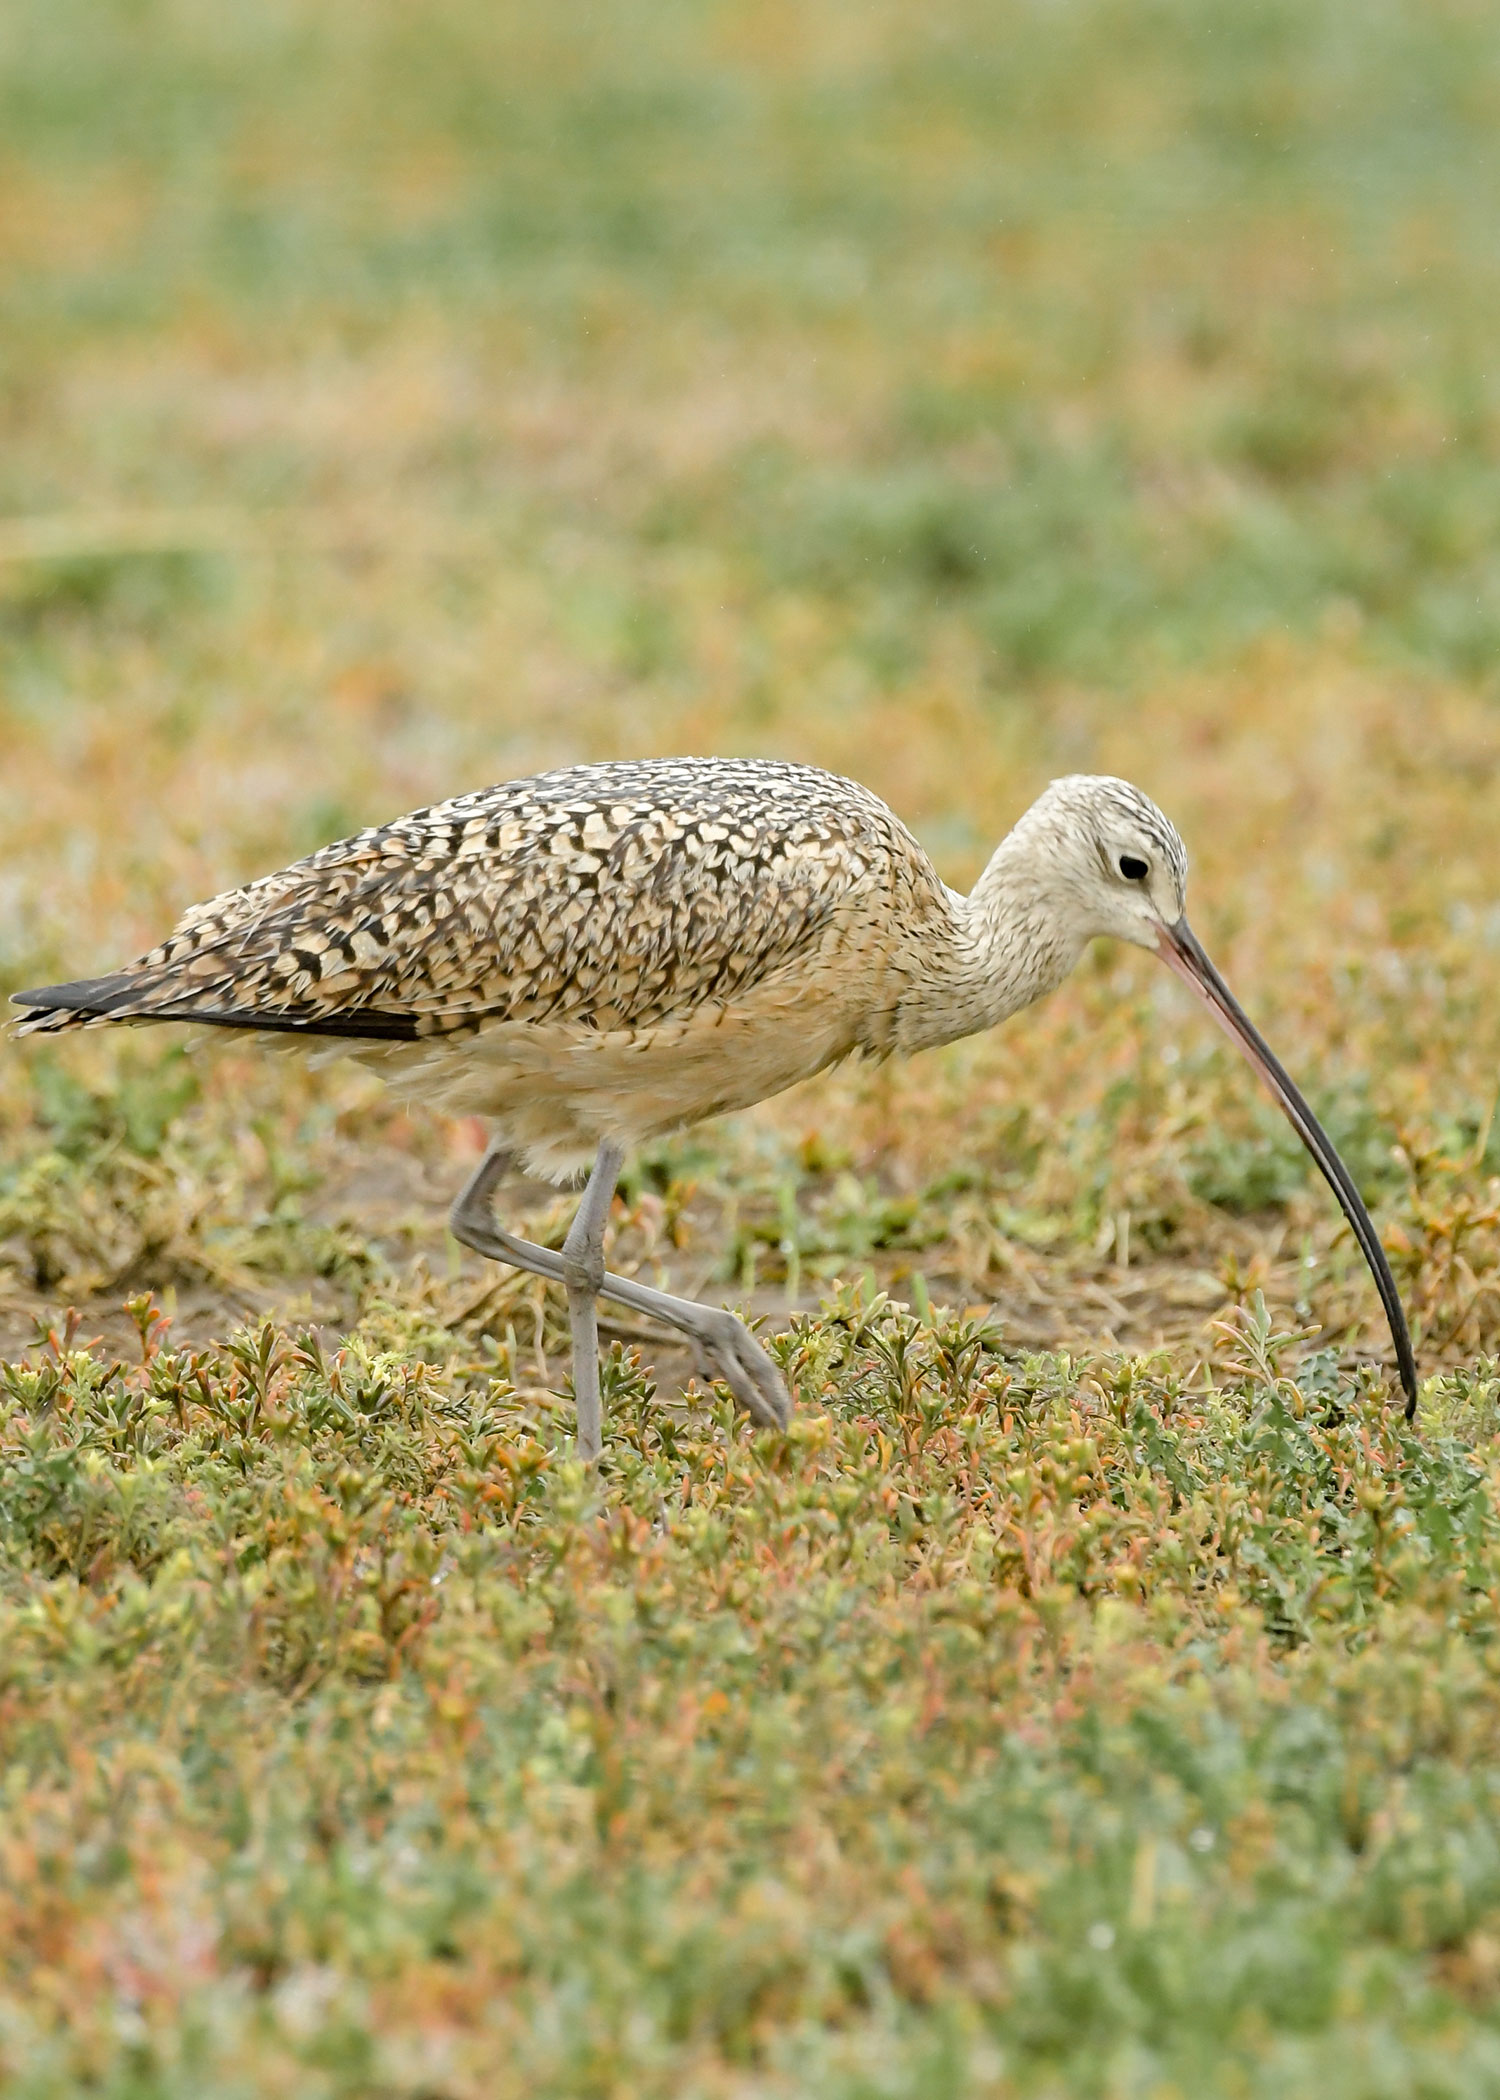 Long-billed curlew looking for food in a field